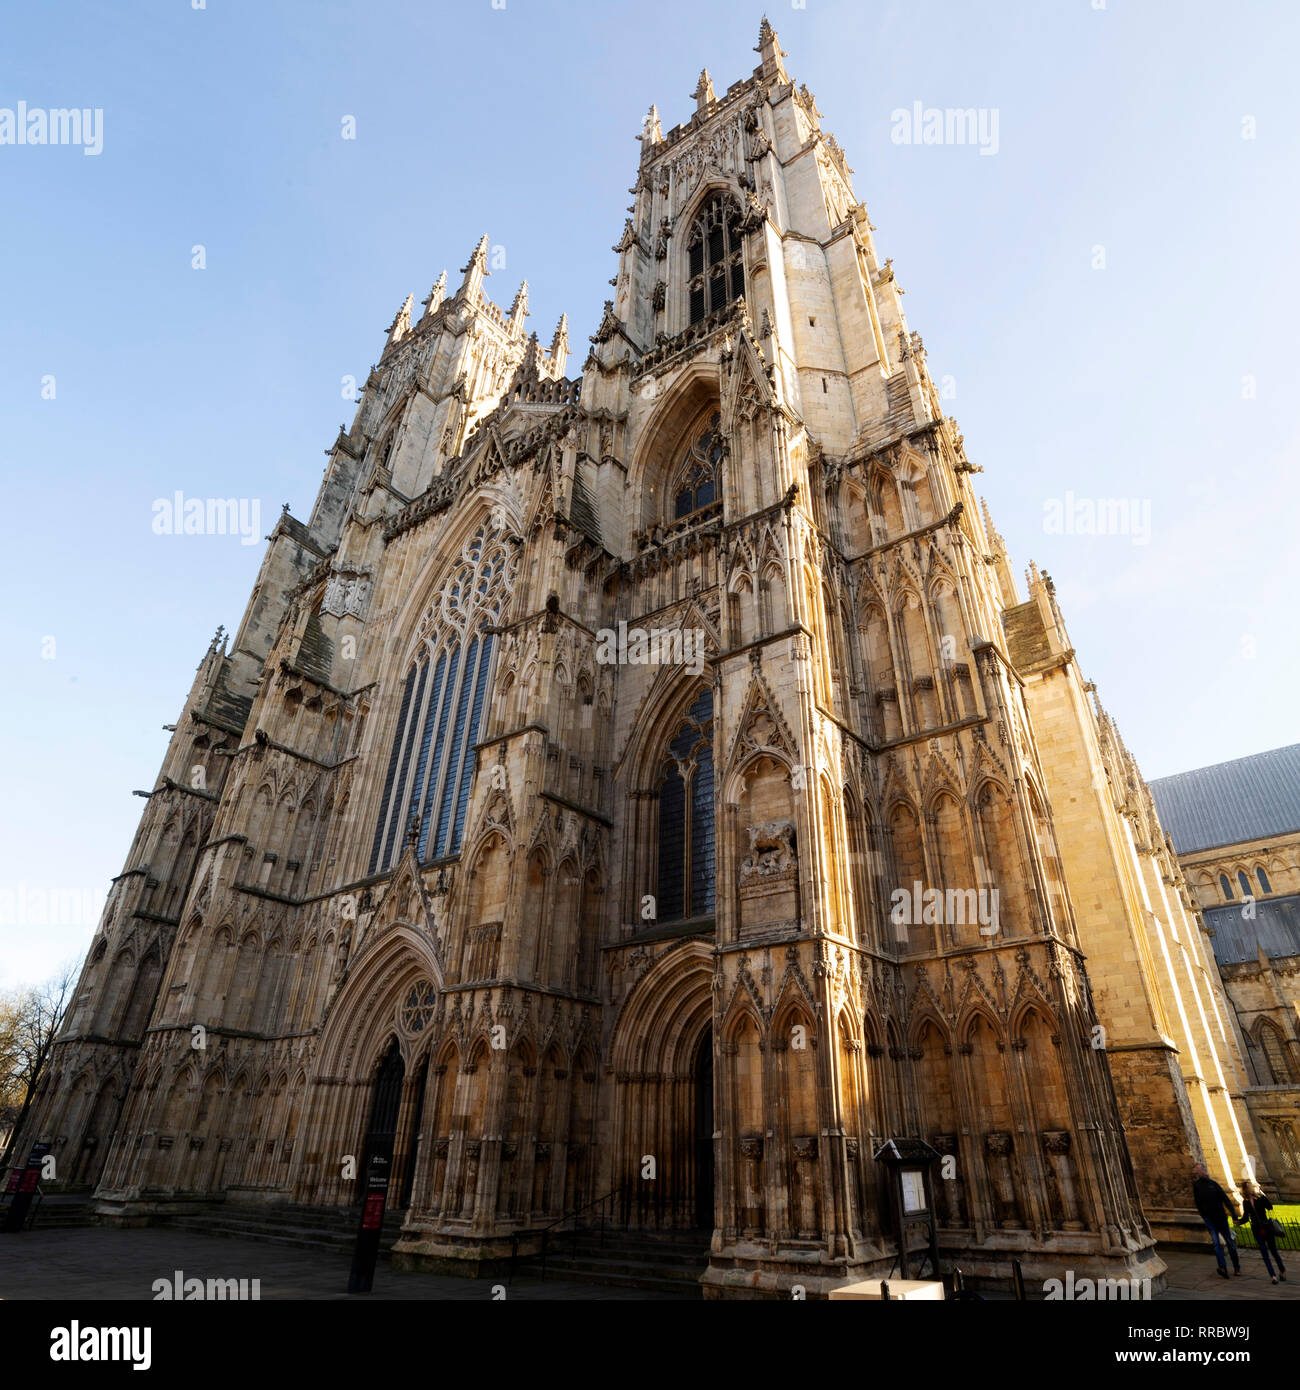 The east transcept of York Minster in York, England. The construction of the place of worship began in the 13th century. Stock Photo